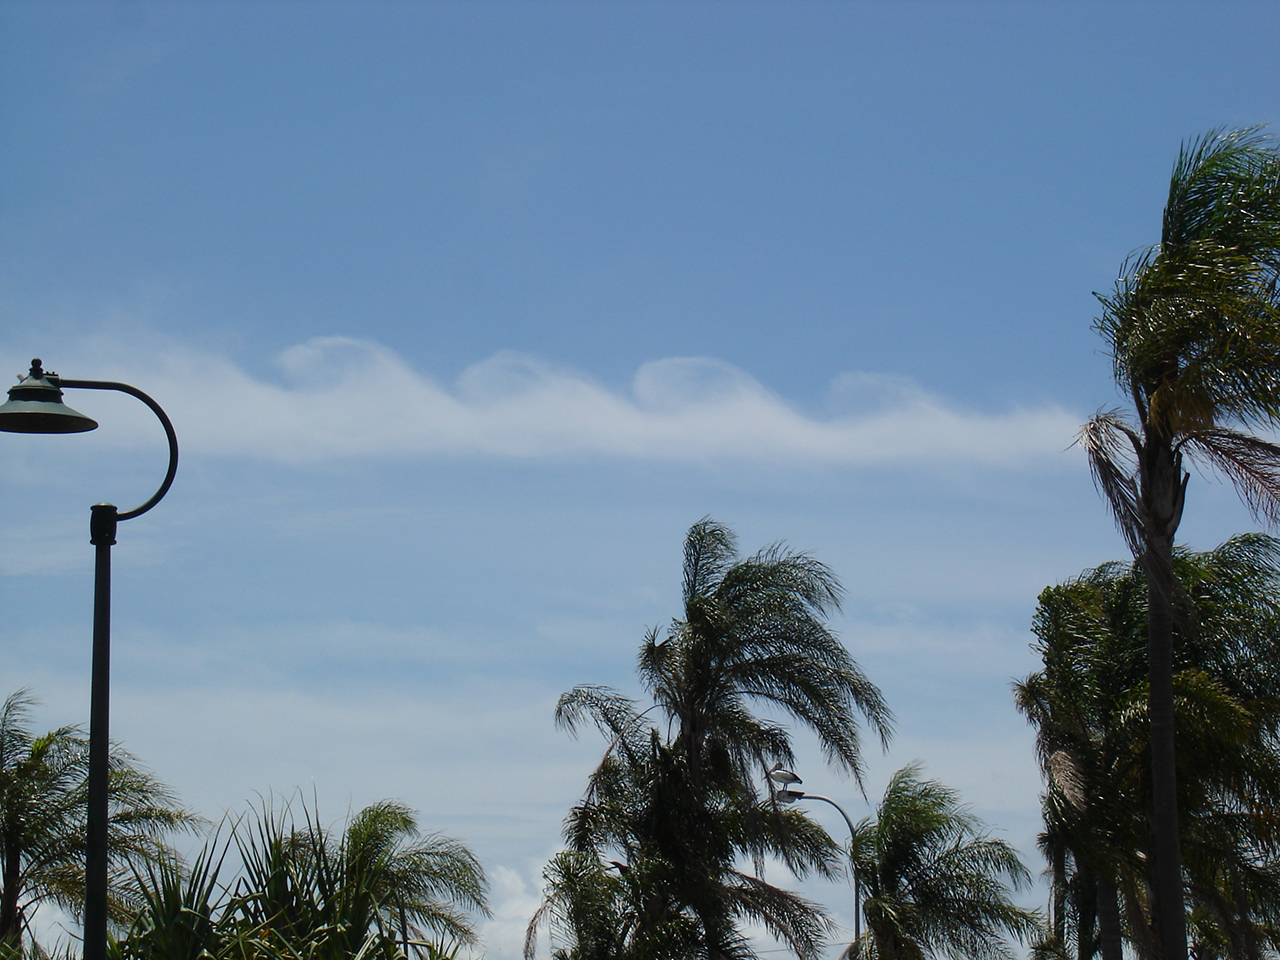 Kelvin-Helmholtz waves with their classic surfer's wave shape